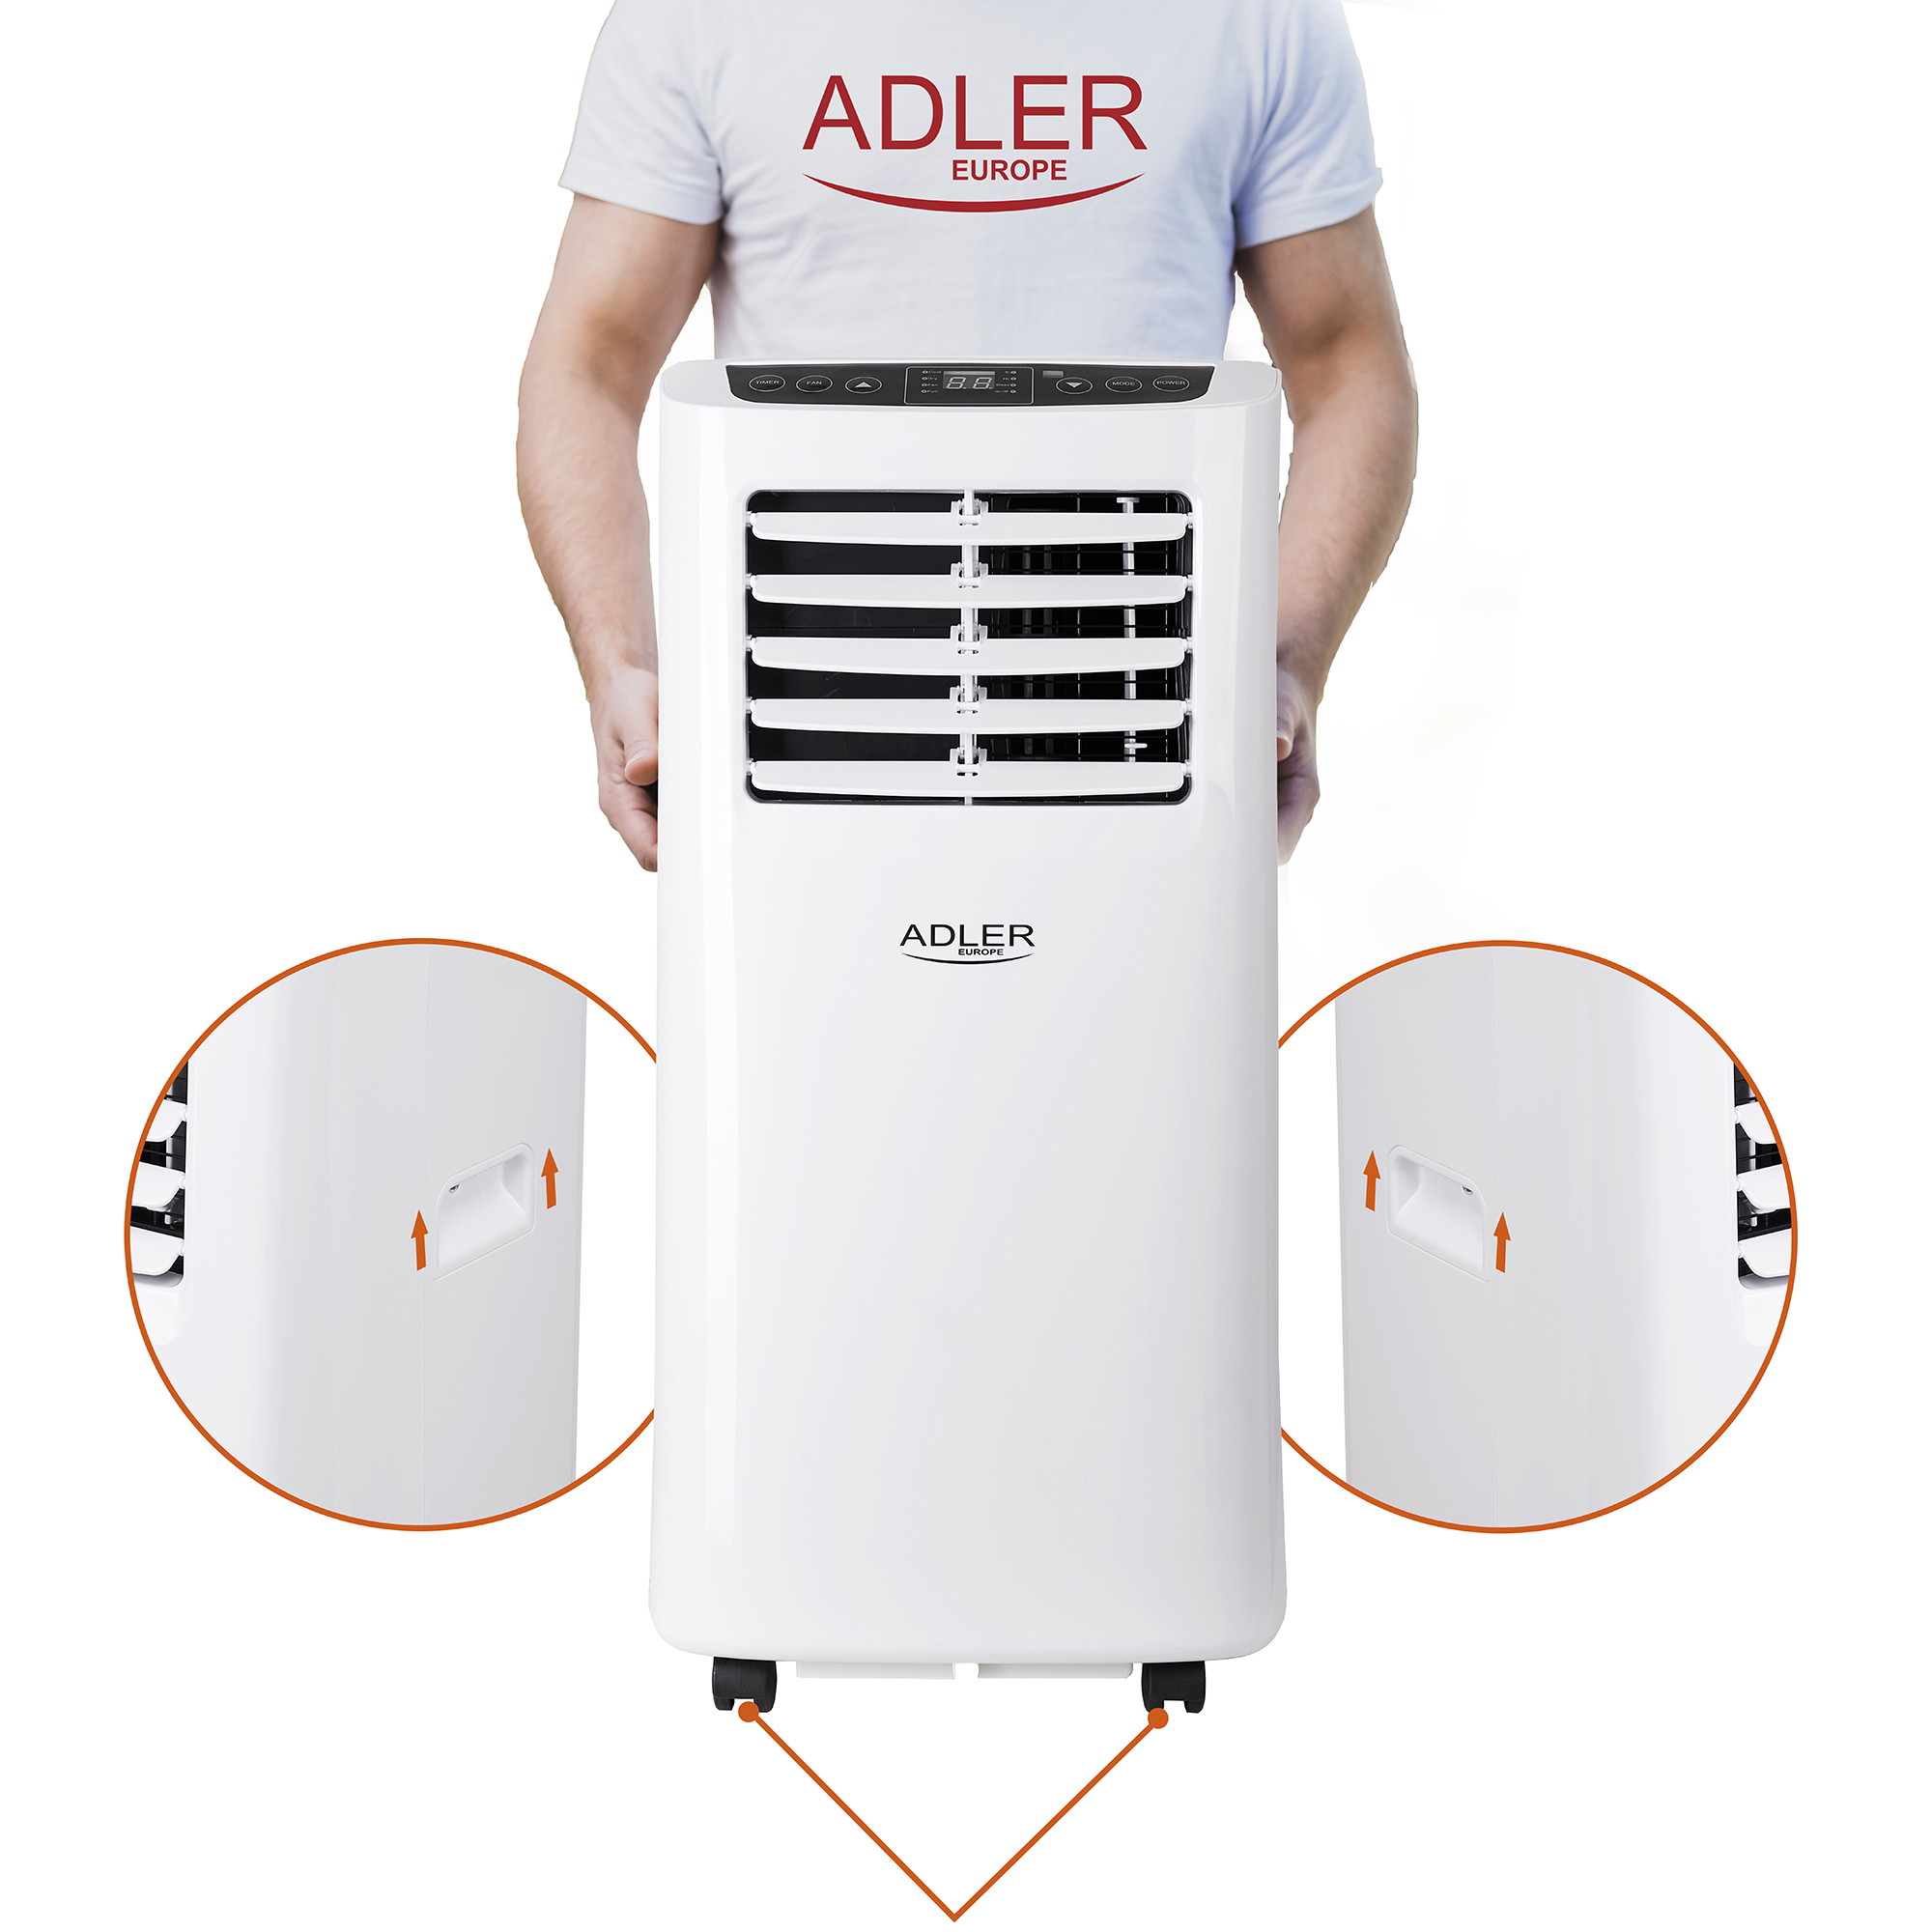 The AD 7916 air conditioner has ventilation, cooling and dehumidification functions, making it a very useful device all year round. To make it comfortable to use, the air conditioner is equipped with a remote control and a timer to turn it on or off autom